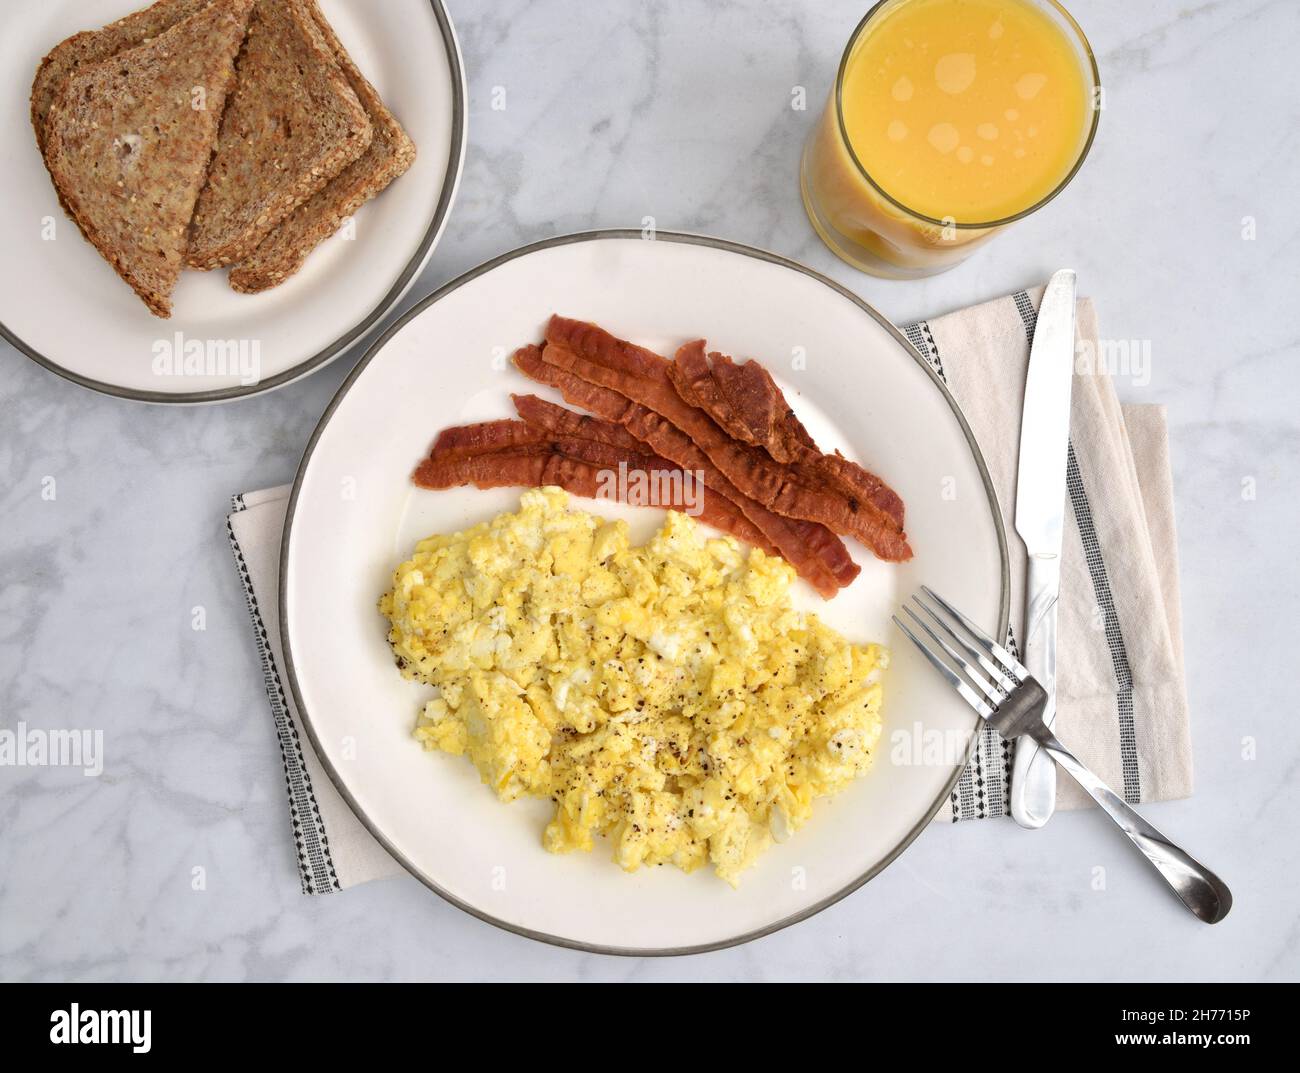 Overhead view of a plate of bacon and scrambled eggs with whole grain toast and a glass of orange juice Stock Photo